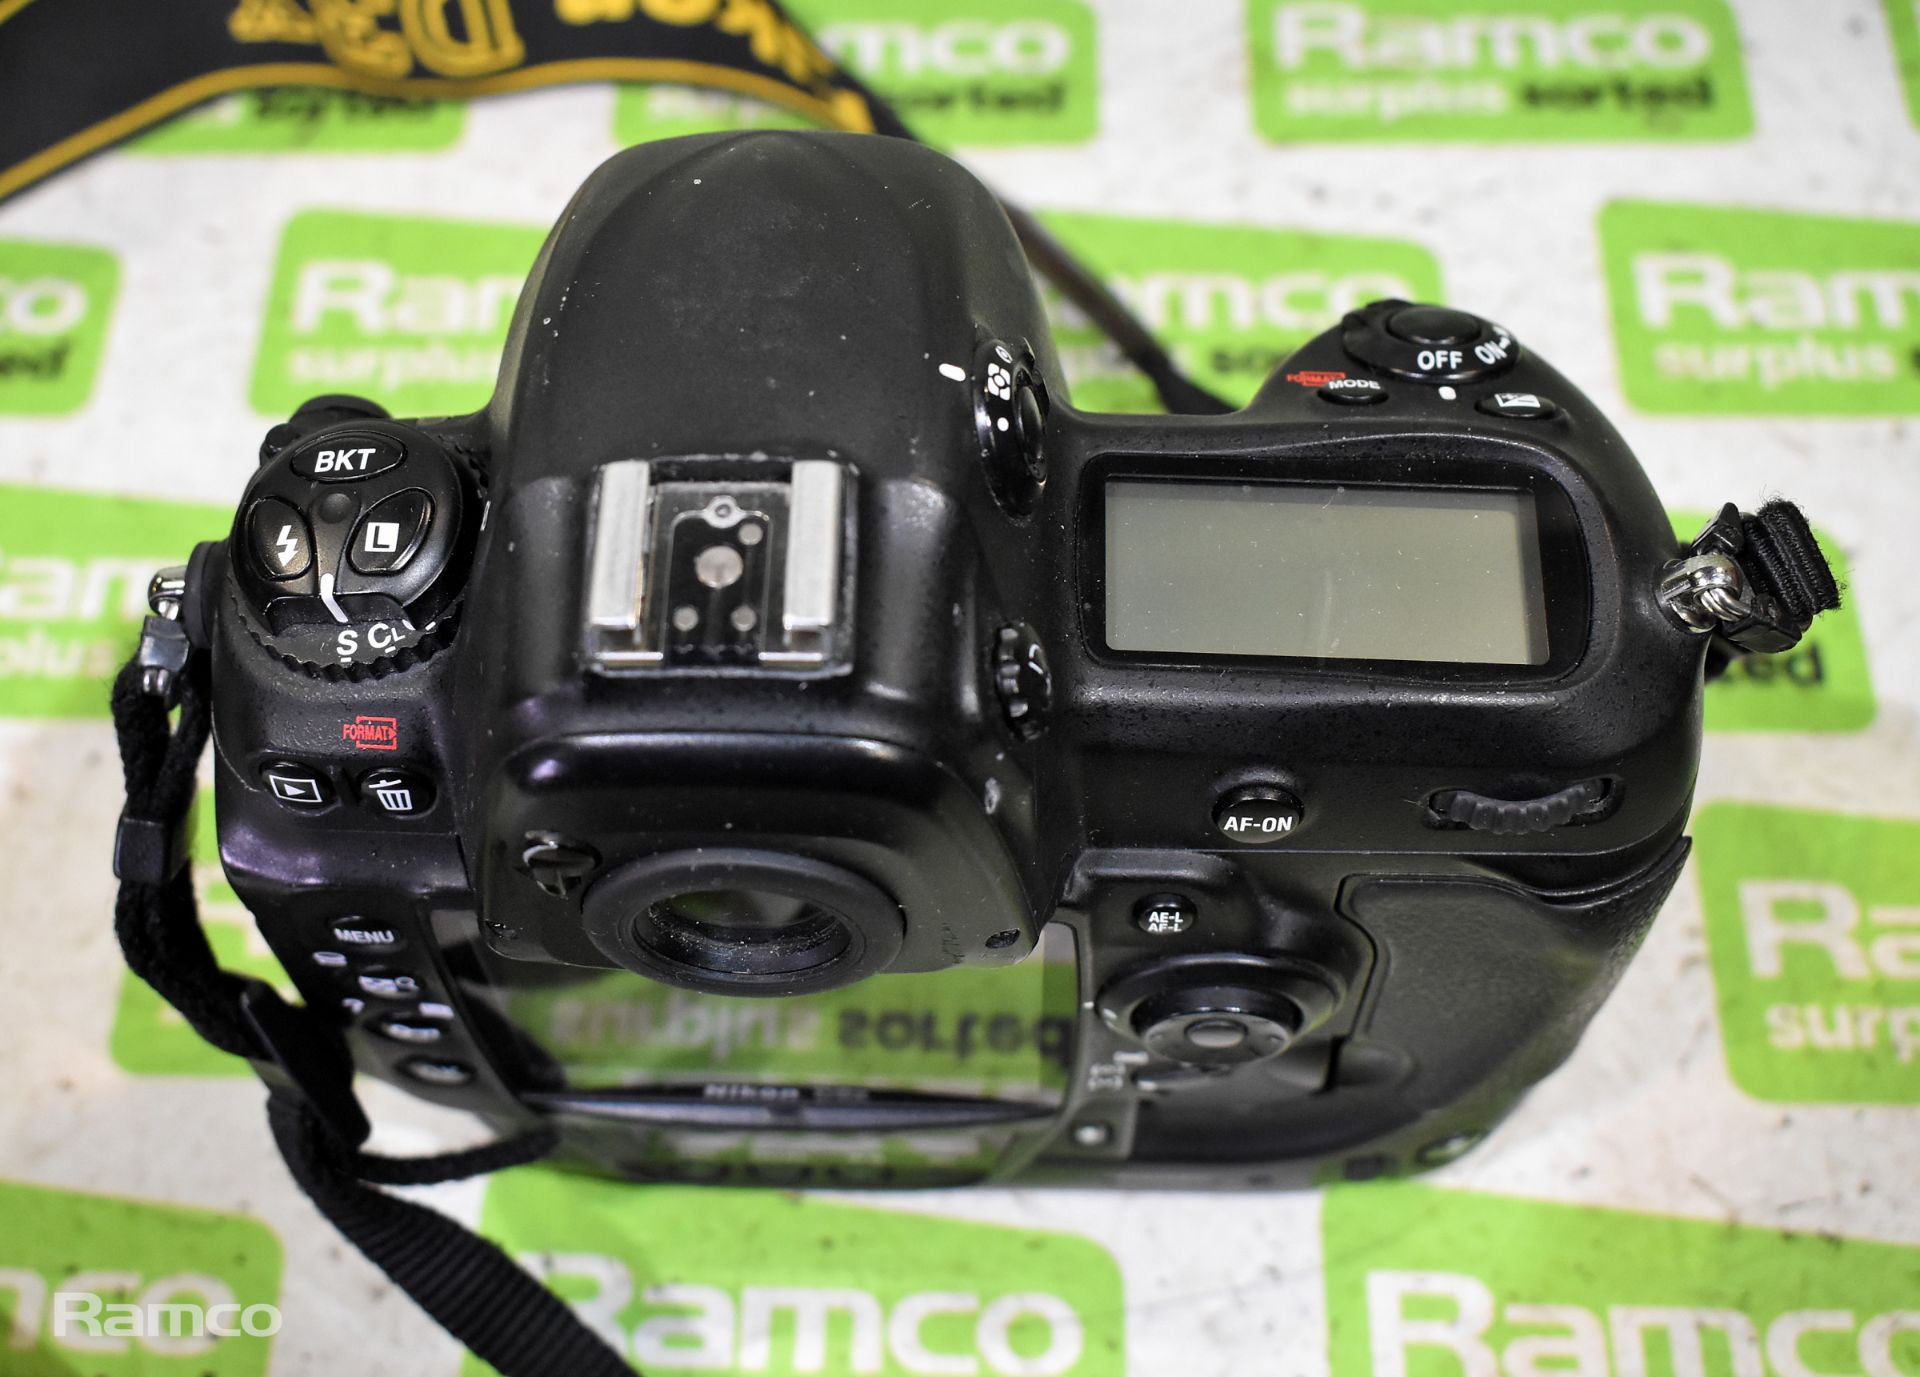 Nikon D3x Digital camera with Li-ion battery and MH-21 fast charger - Image 7 of 14